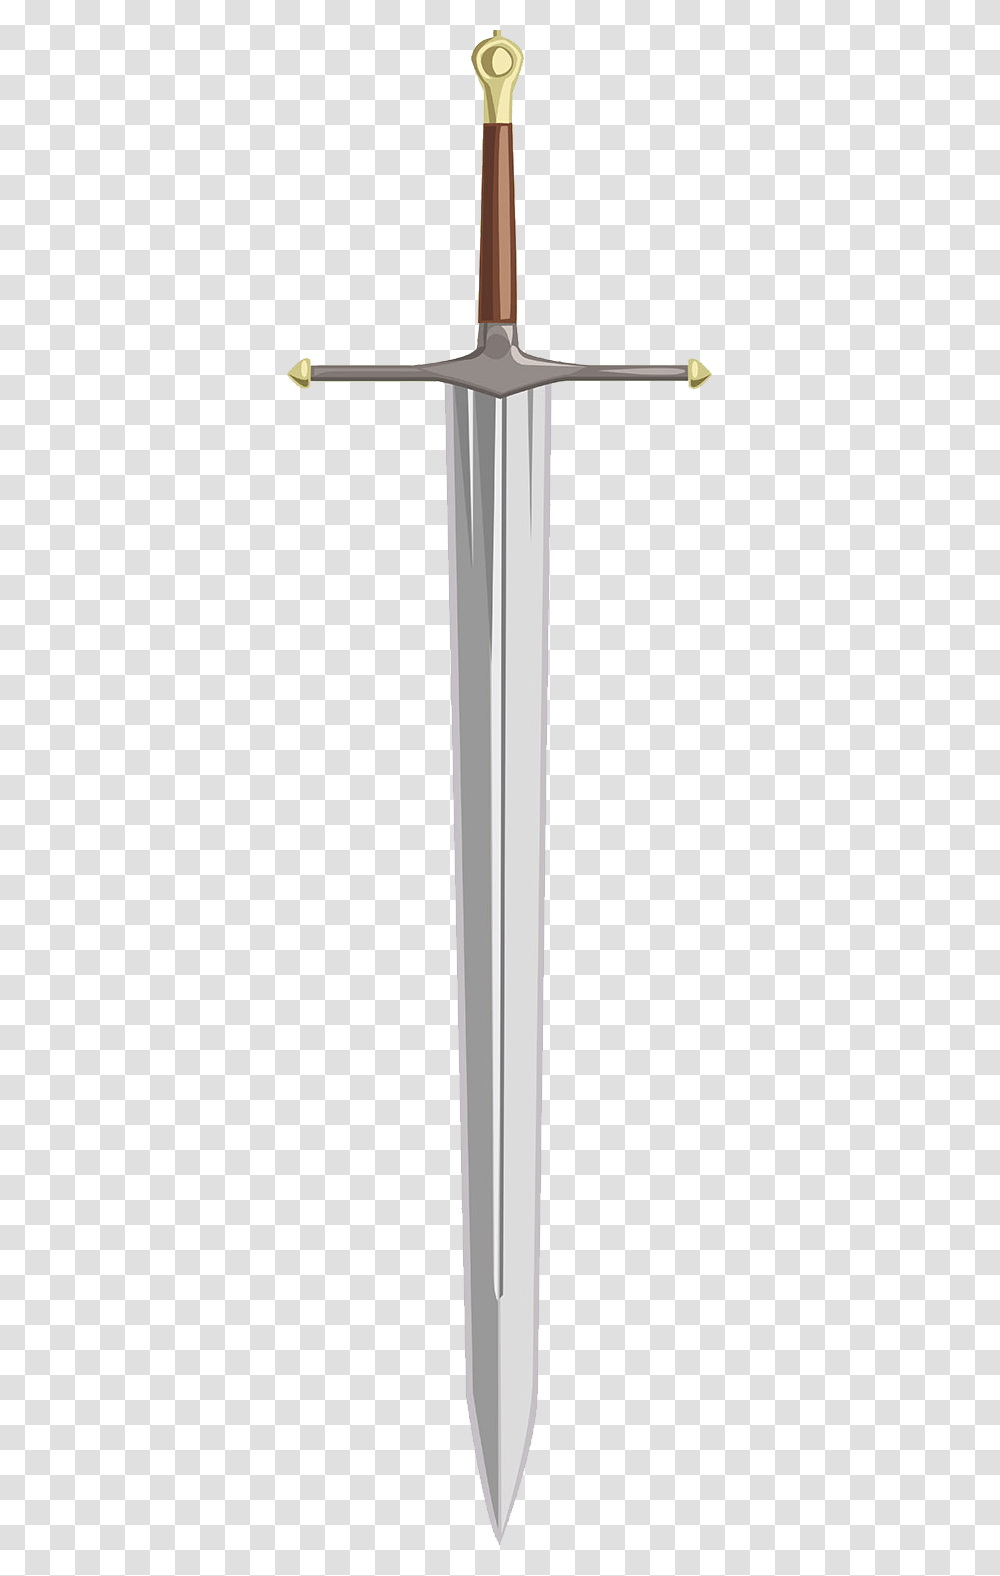 Ice Sword Game Of Thrones, Blade, Weapon, Weaponry Transparent Png